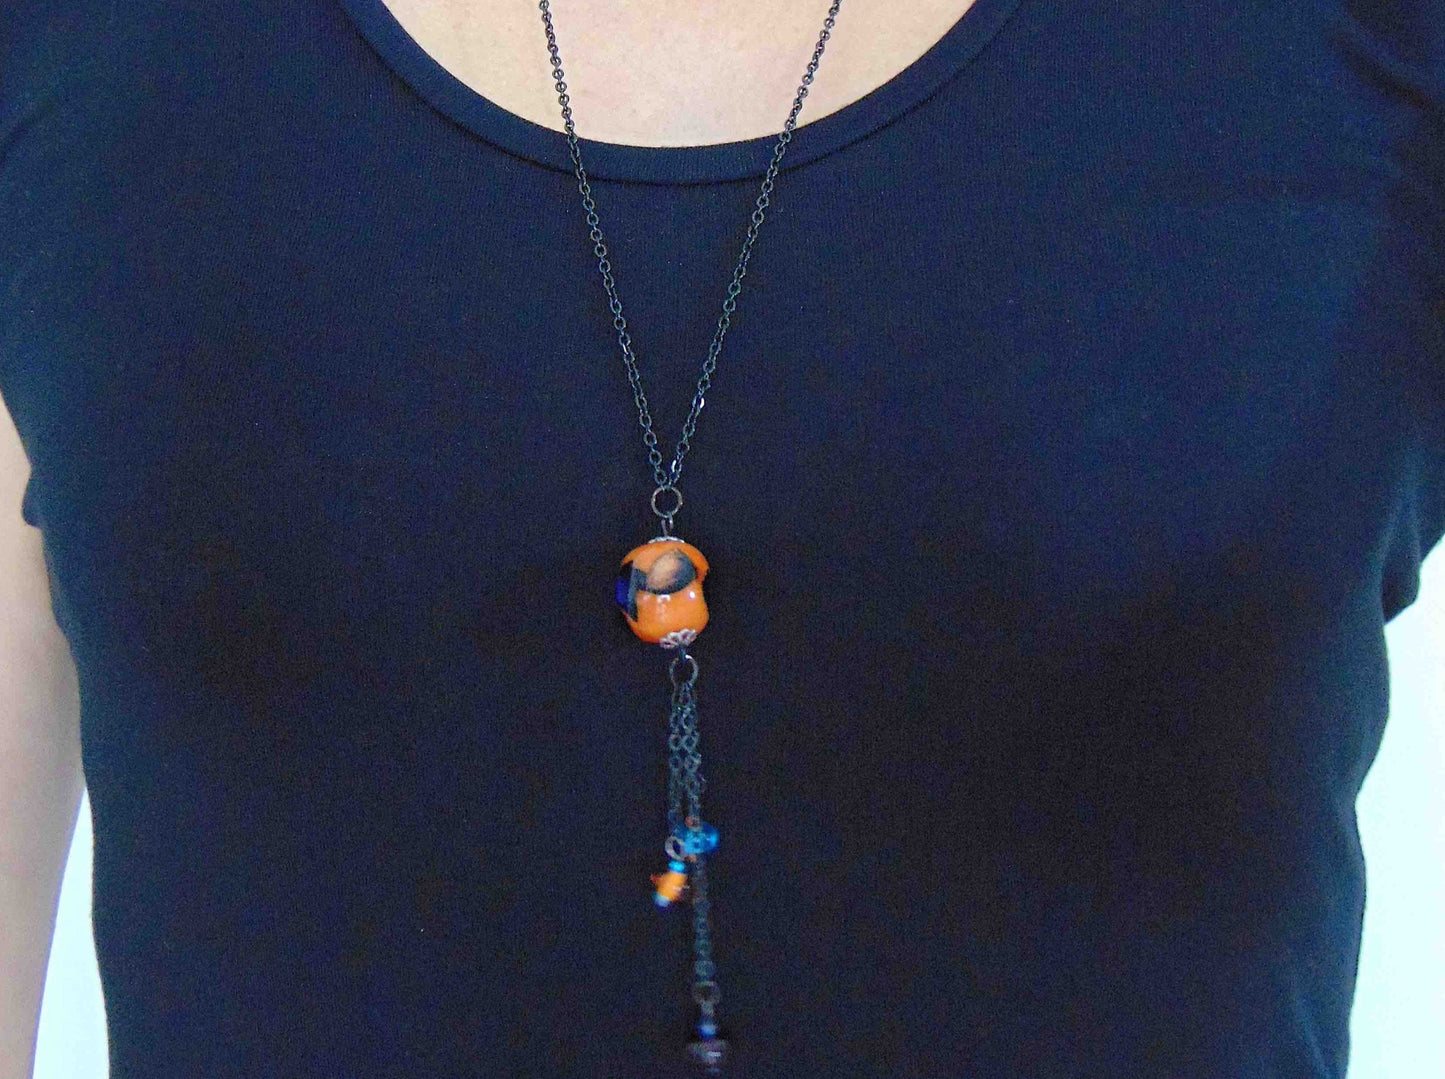 27-inch necklace with elongated glass ball and matching pendants in bright orange-black-blue (Murano-style glass handmade in Montreal), black stainless steel chain